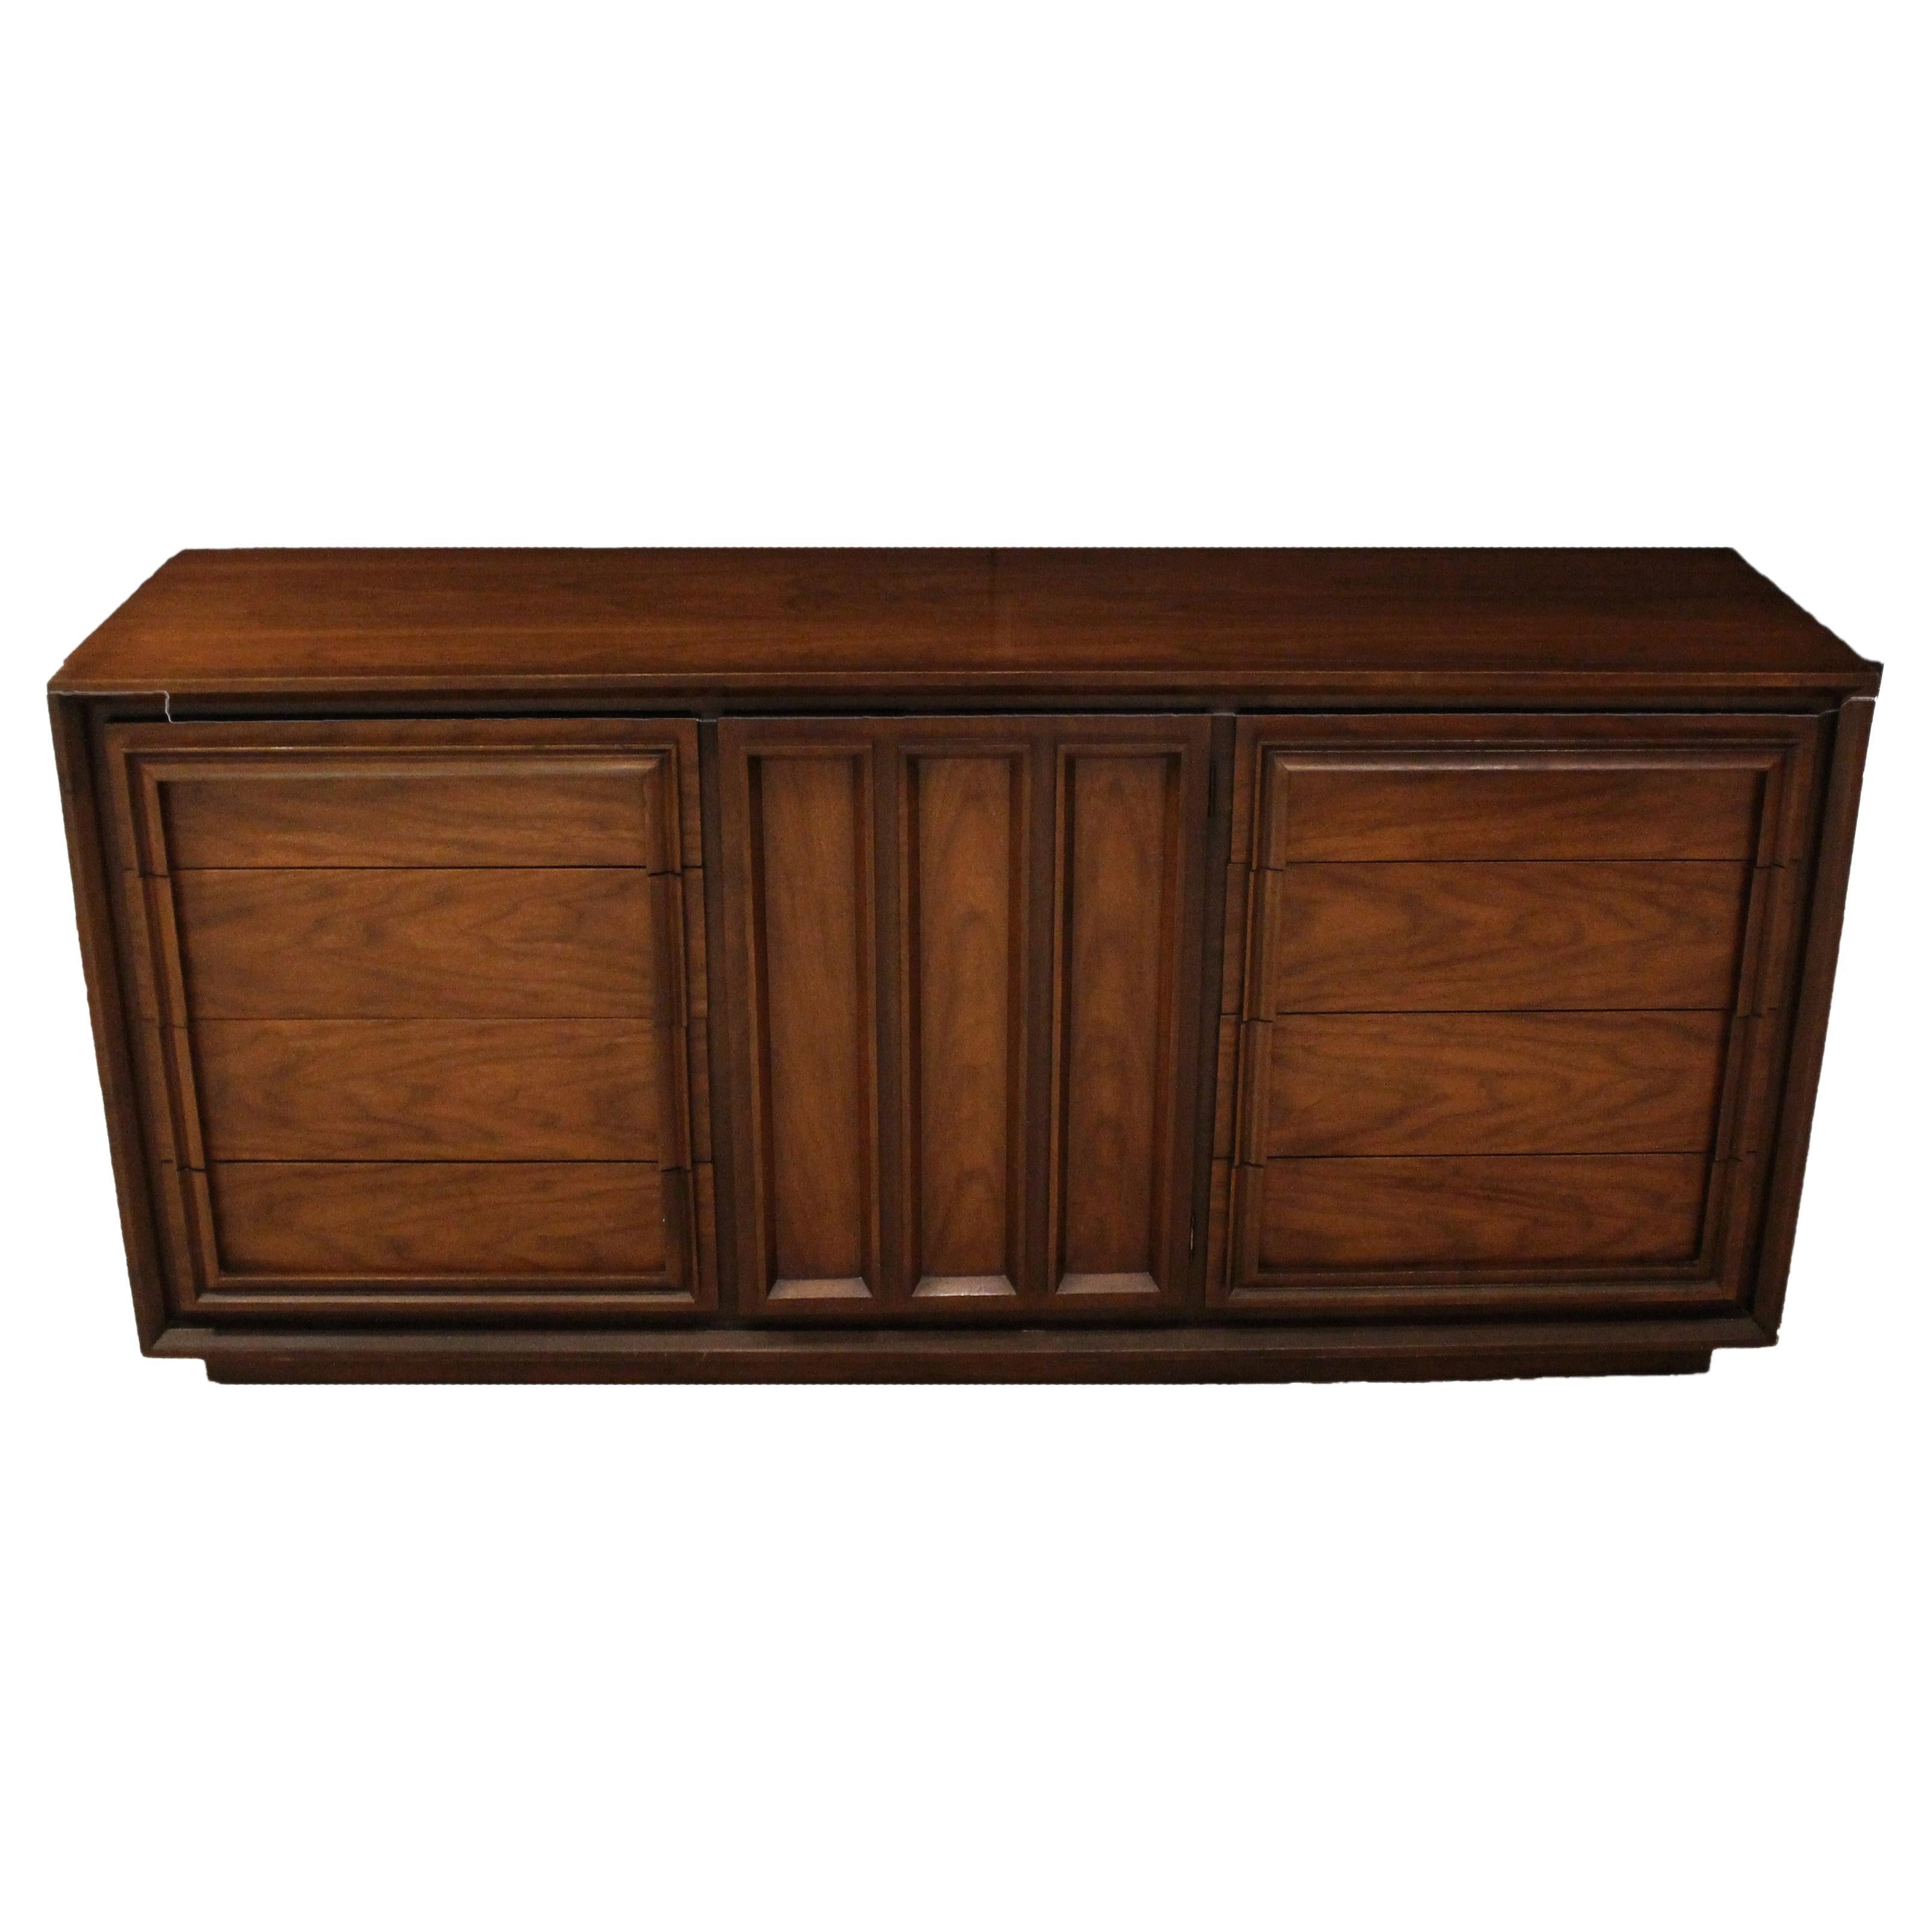 circa 1960s Mid-Century Modern Low Dresser or Credenza For Sale